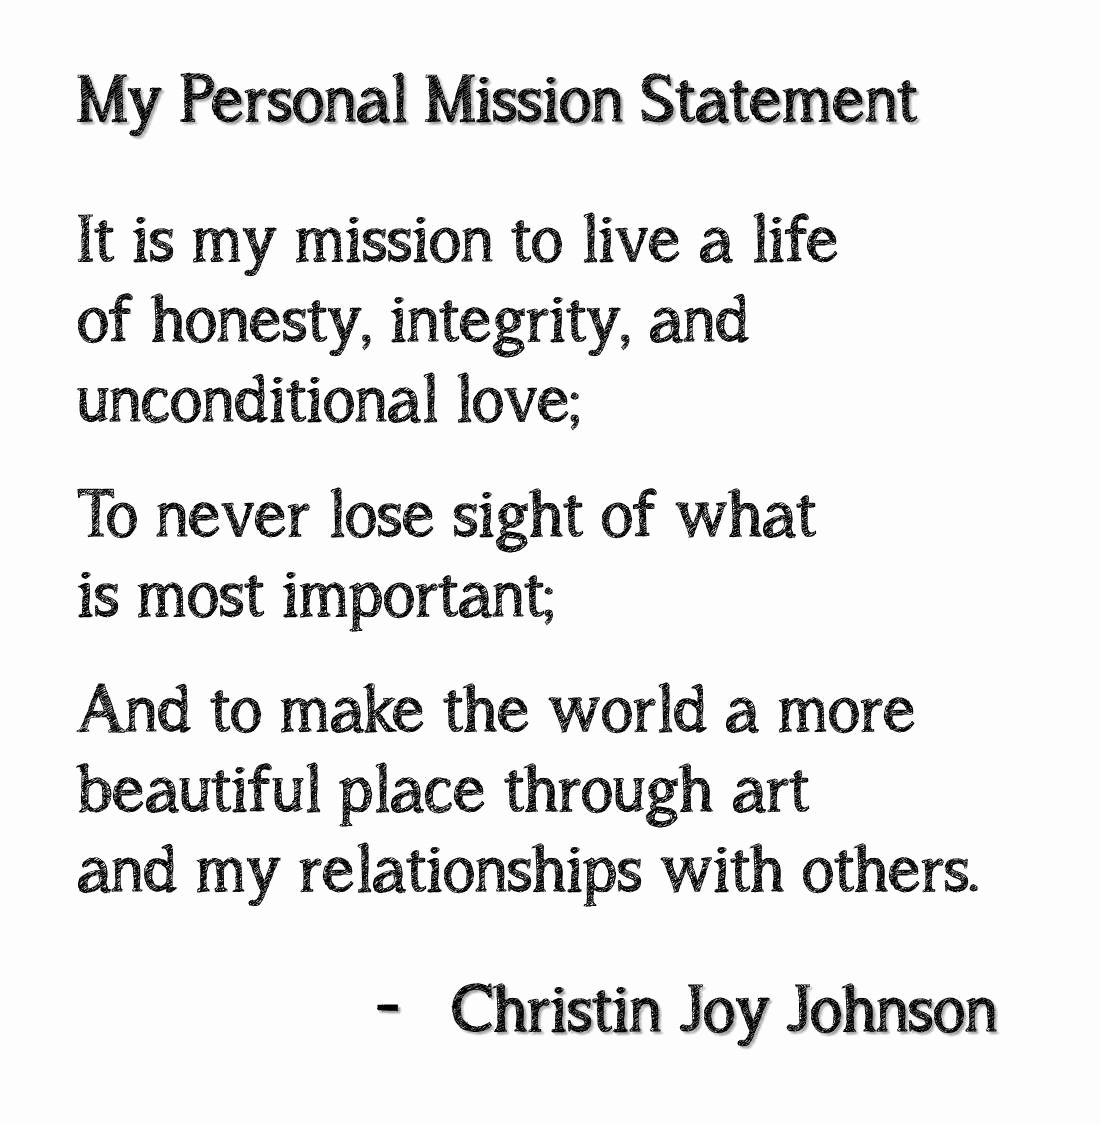 Personal Mission Statement Template for Students Awesome Personal Mission Statement